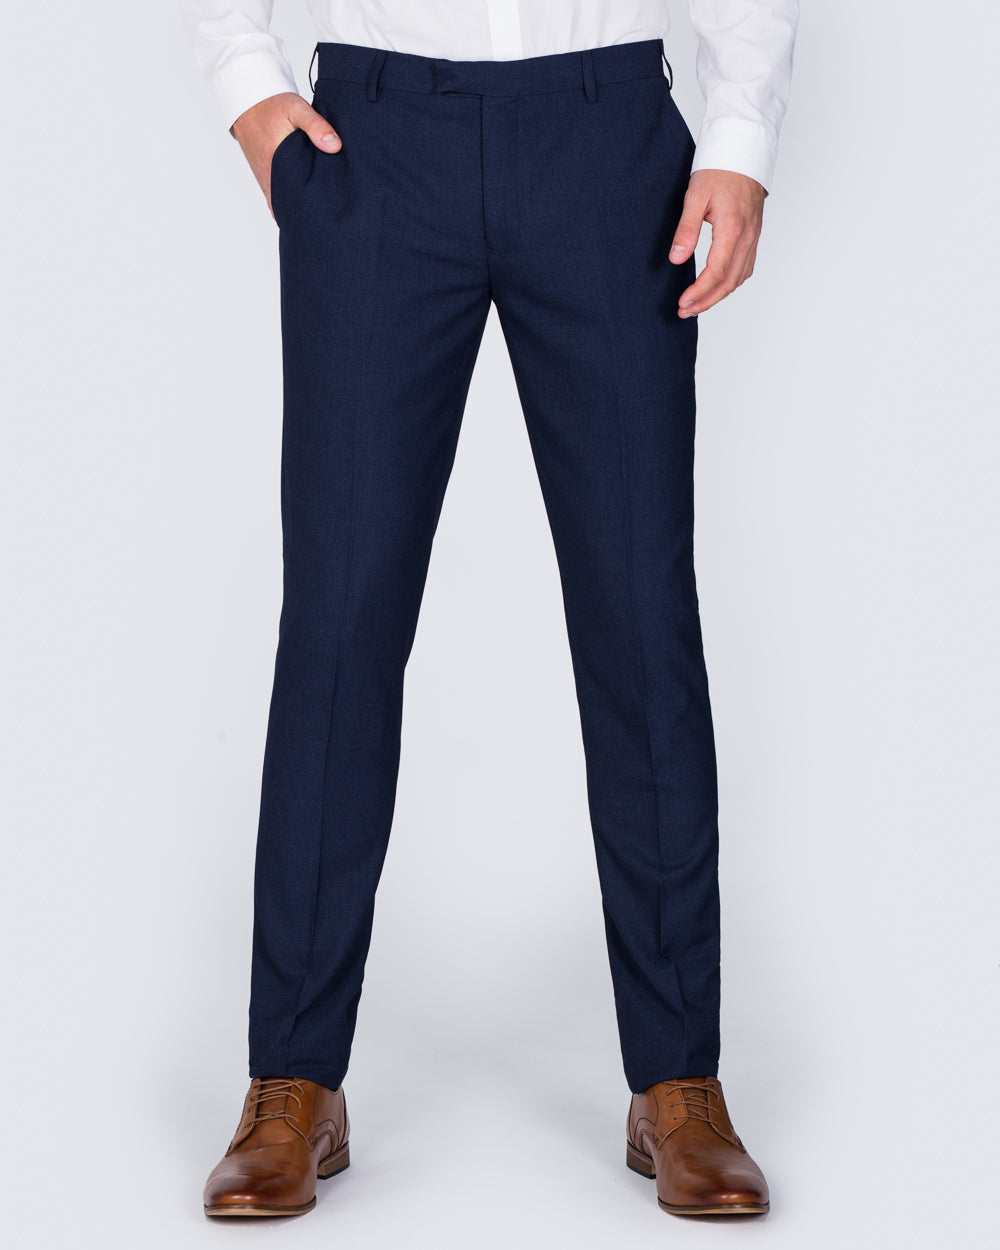 Skopes Harcourt Skinny Fit Tall Suit (navy)